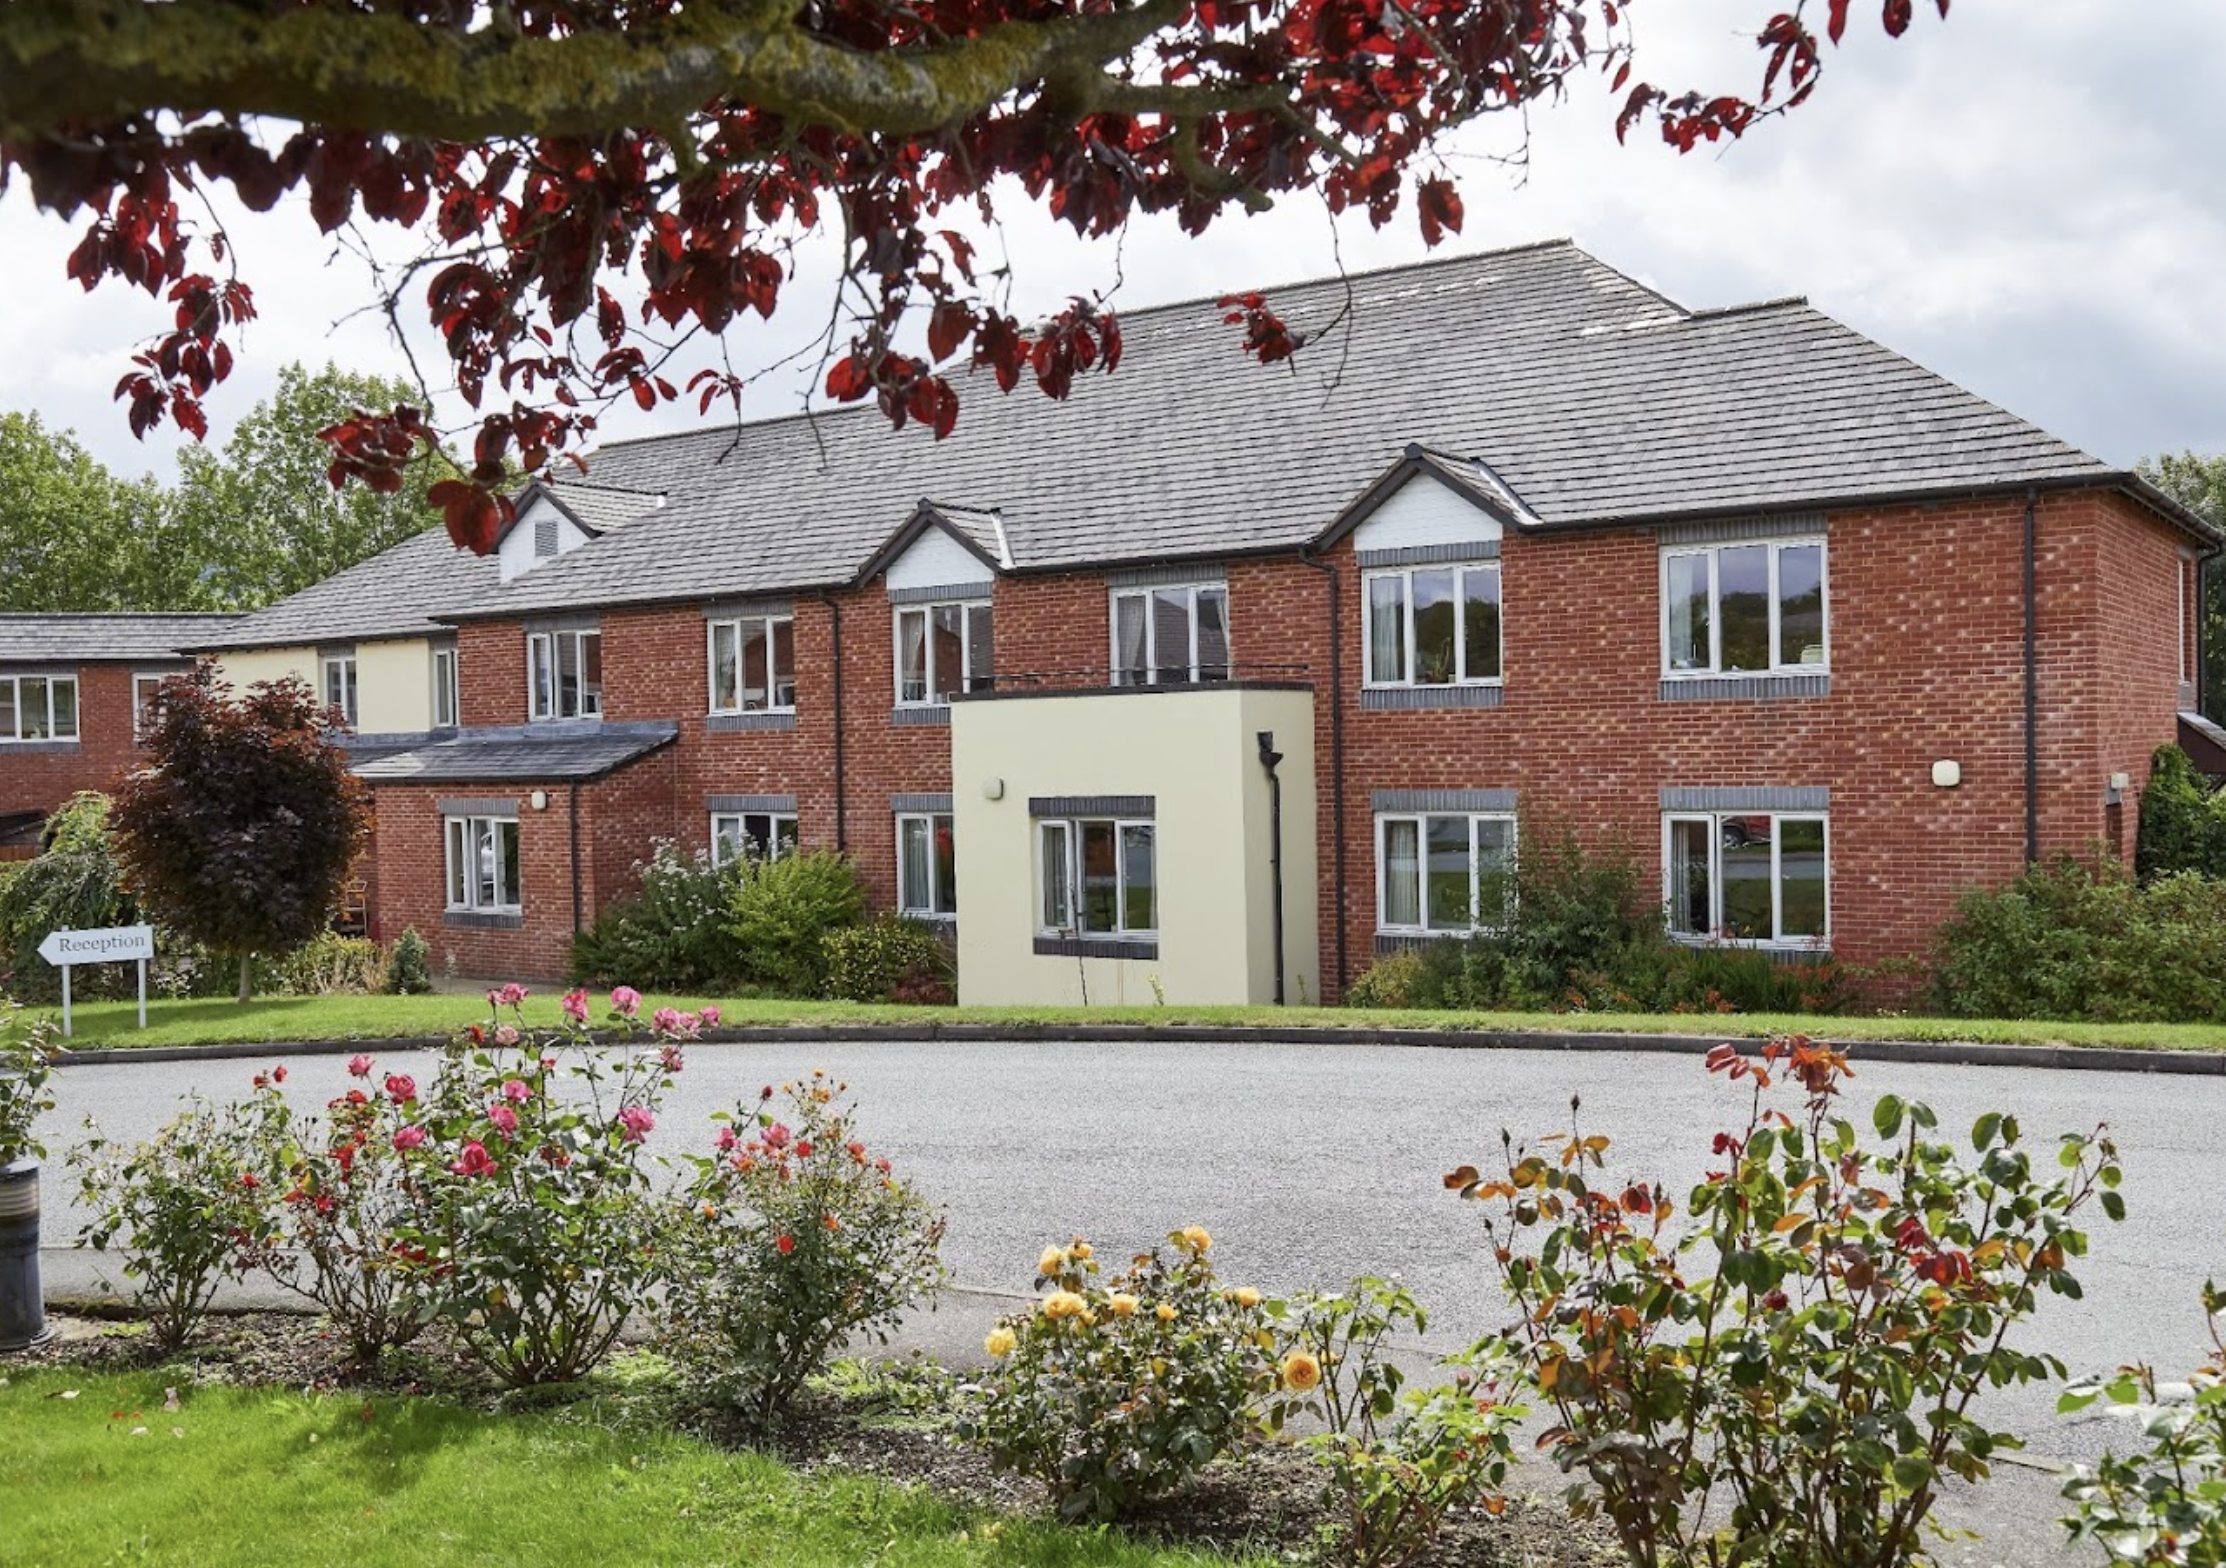 Exterior of The Rhallt care home in Welshpool, Wales